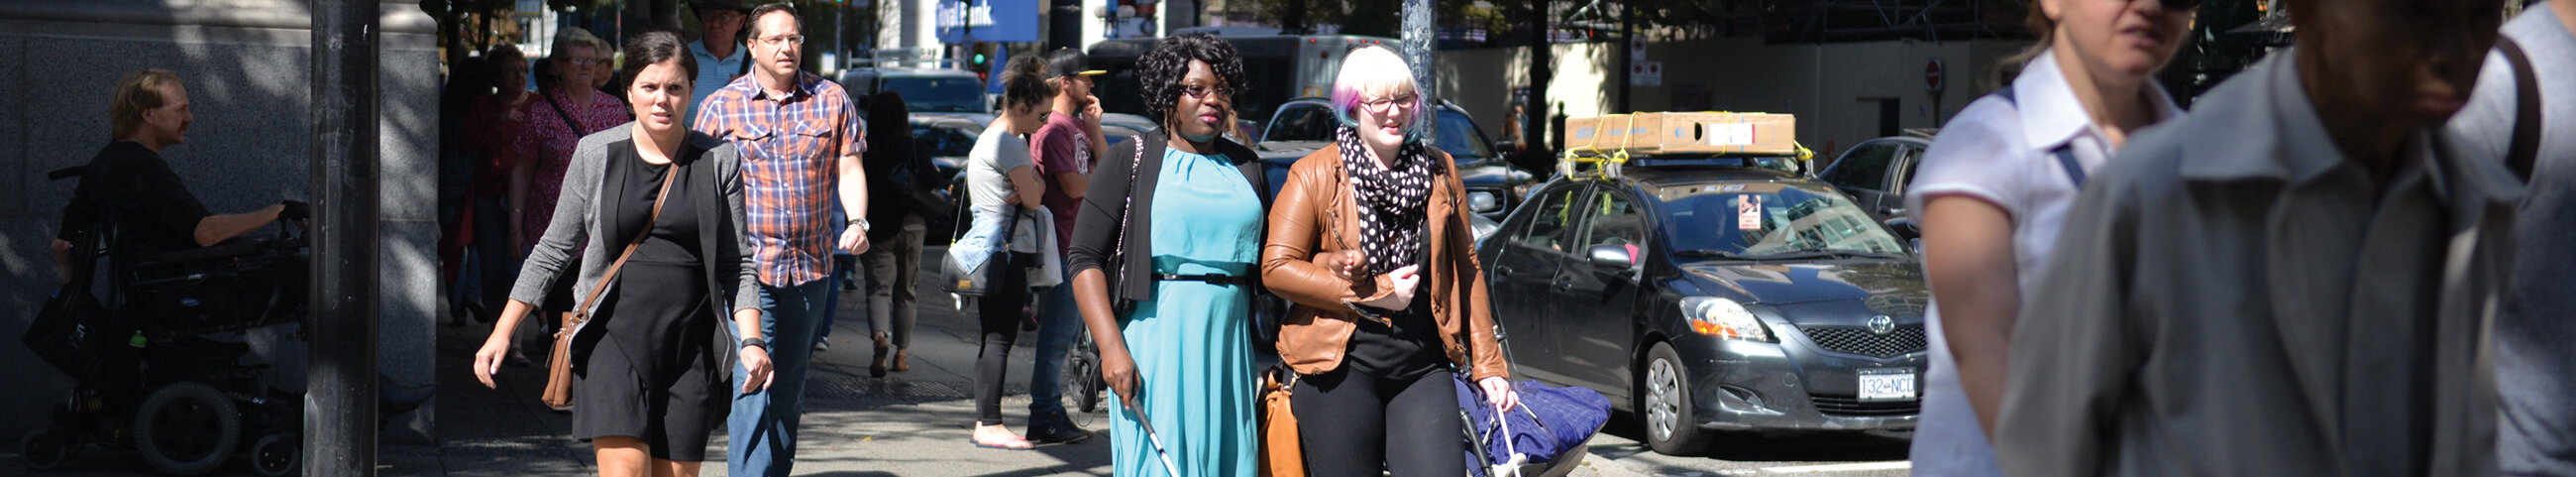 A person with multi-coloured hair guiding a person who is blind across a busy street